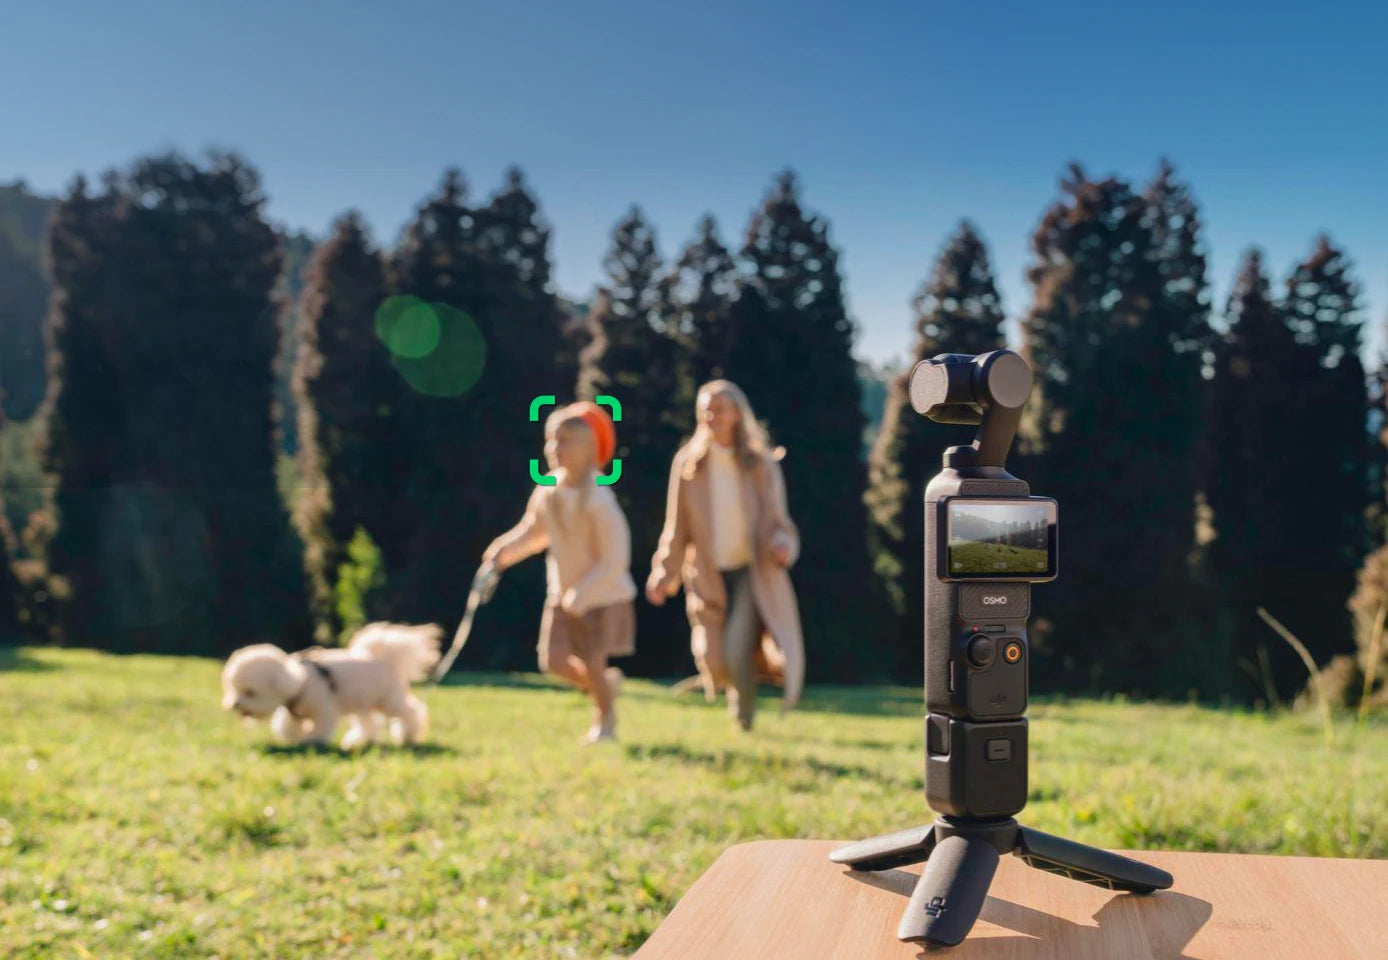 DJI Osmo Pocket 3, in Timelapse mode, you can set the resolution, frame rate, interval, and duration